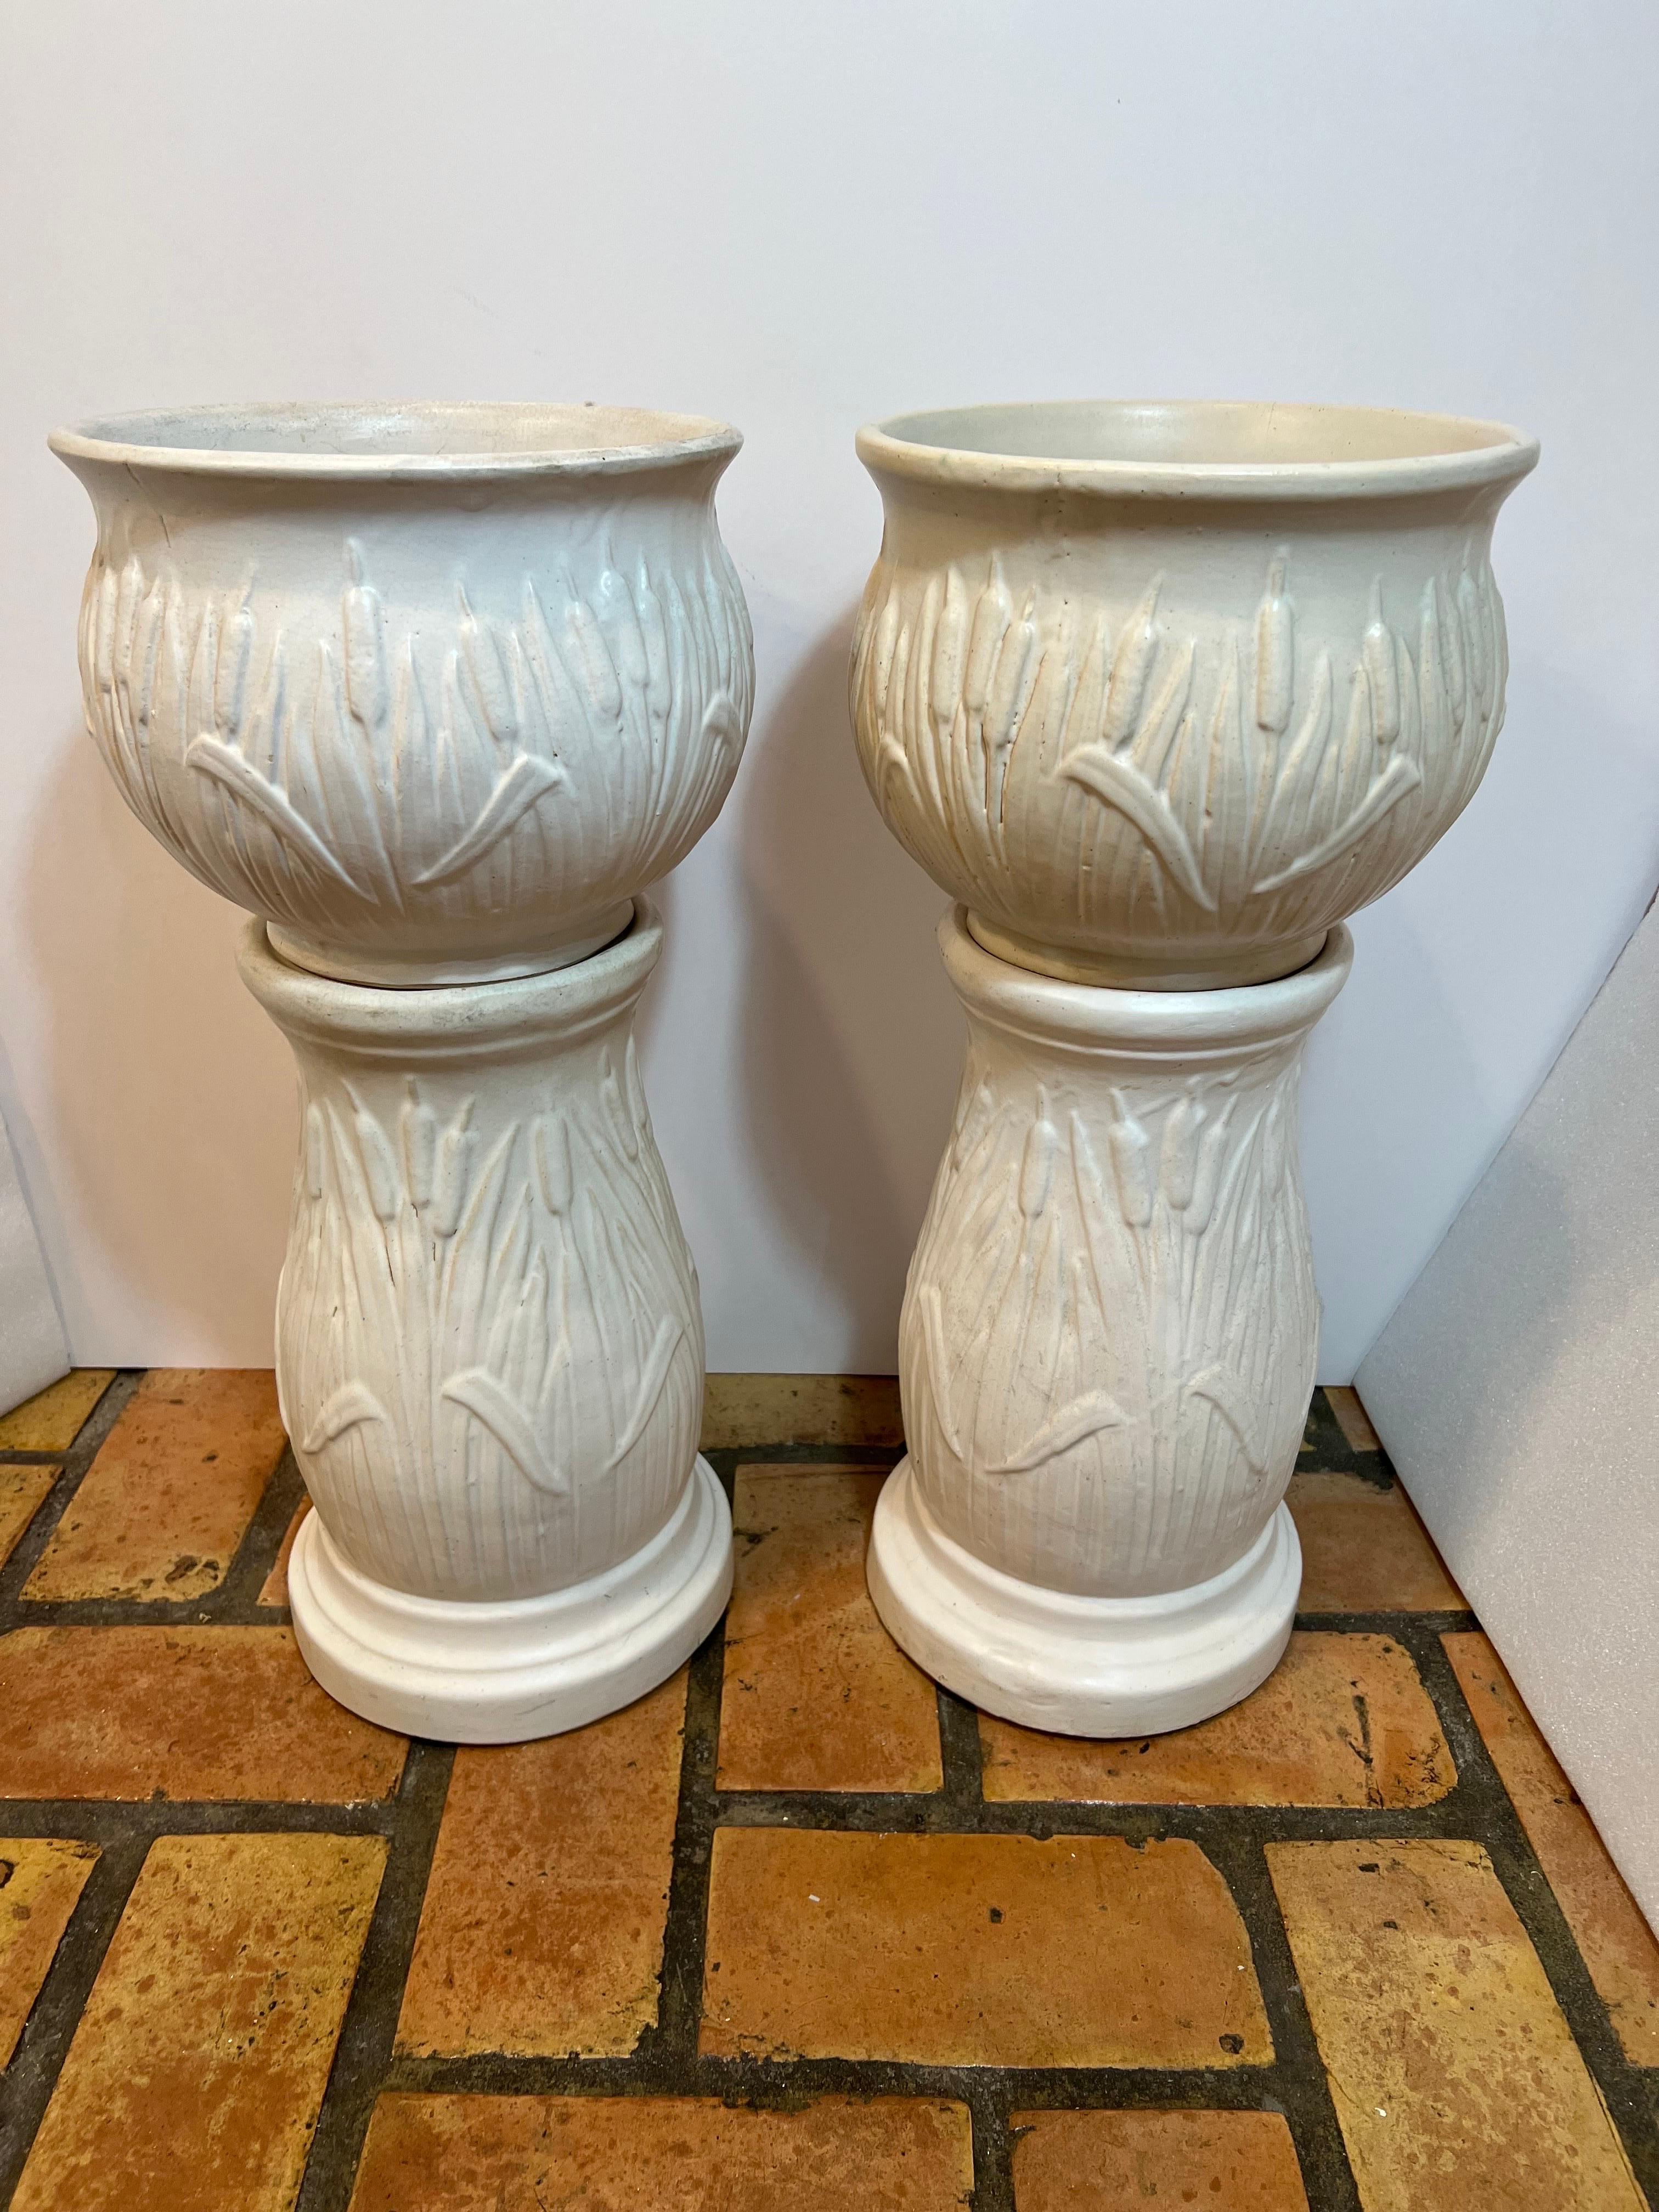 Pair of Robinson Rainsbottom Pottery Jardiniere and Pedestals with a Cattail design. Nice rare pair of matte white Cattail jardinieres and pedestals. Great set for that collector. Amazing detail to this pairs. Intricate molded exterior of Cattails